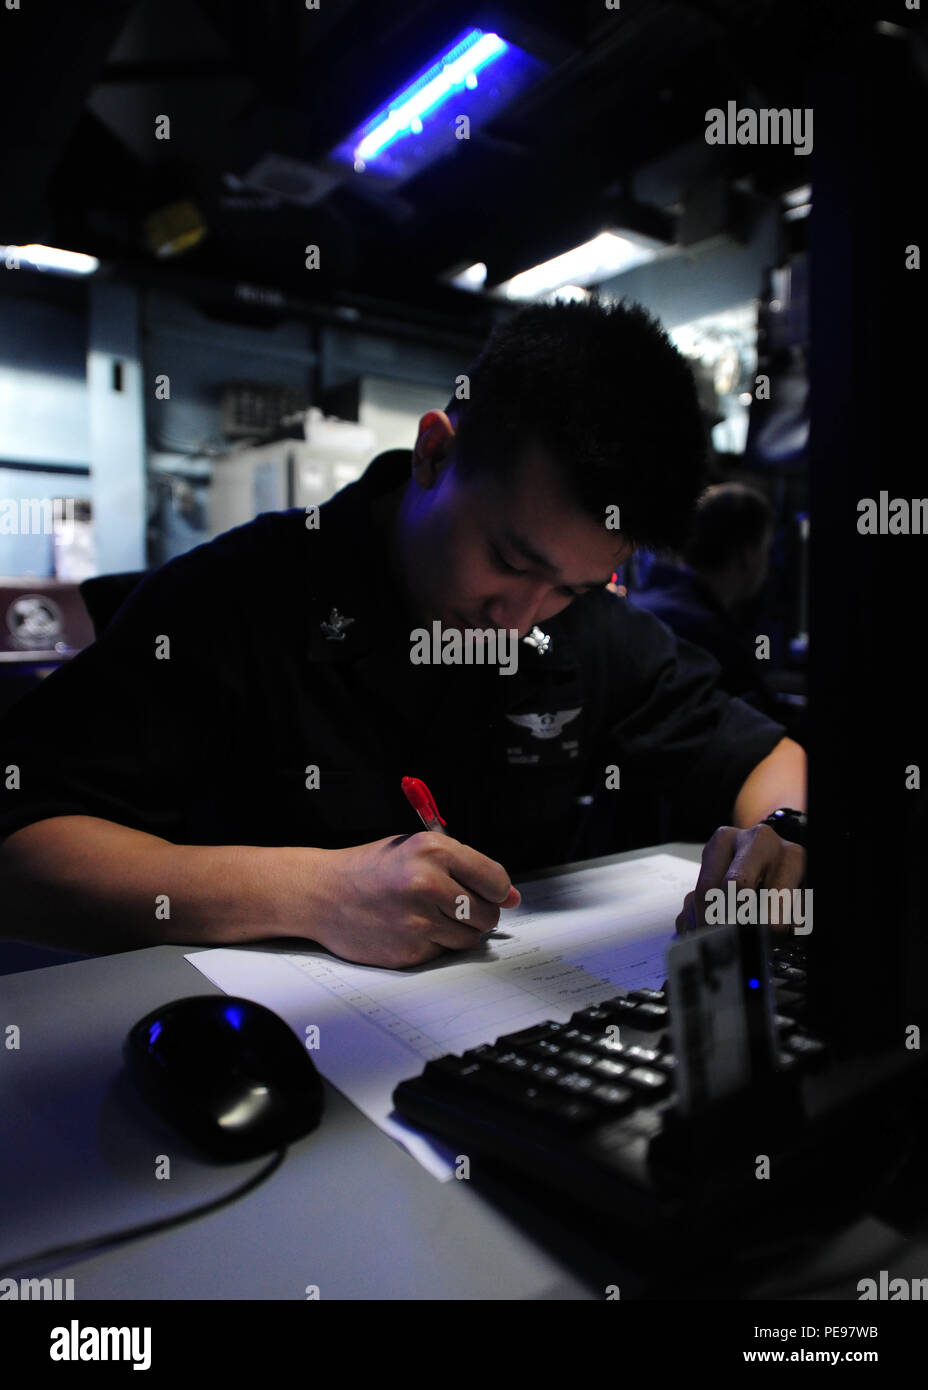 151112-N-PG340-066 PACIFIC OCEAN (Nov. 12, 2015) –Air Traffic Controller 2nd Class Minh Troung, from Phoenix, works on the hot sheet in carrier air traffic control center aboard the aircraft carrier USS Theodore Roosevelt (CVN 71). The hot sheet is a map of the area around the ship’s course that Theodore Roosevelt’s aircraft can fly. Theodore Roosevelt is operating in the U.S. 7th Fleet area of operations as part of a worldwide deployment en route to its new homeport in San Diego to complete a three-carrier homeport shift. (U.S. Navy Photo by Mass Communication Specialist 3rd Class Stephane Be Stock Photo